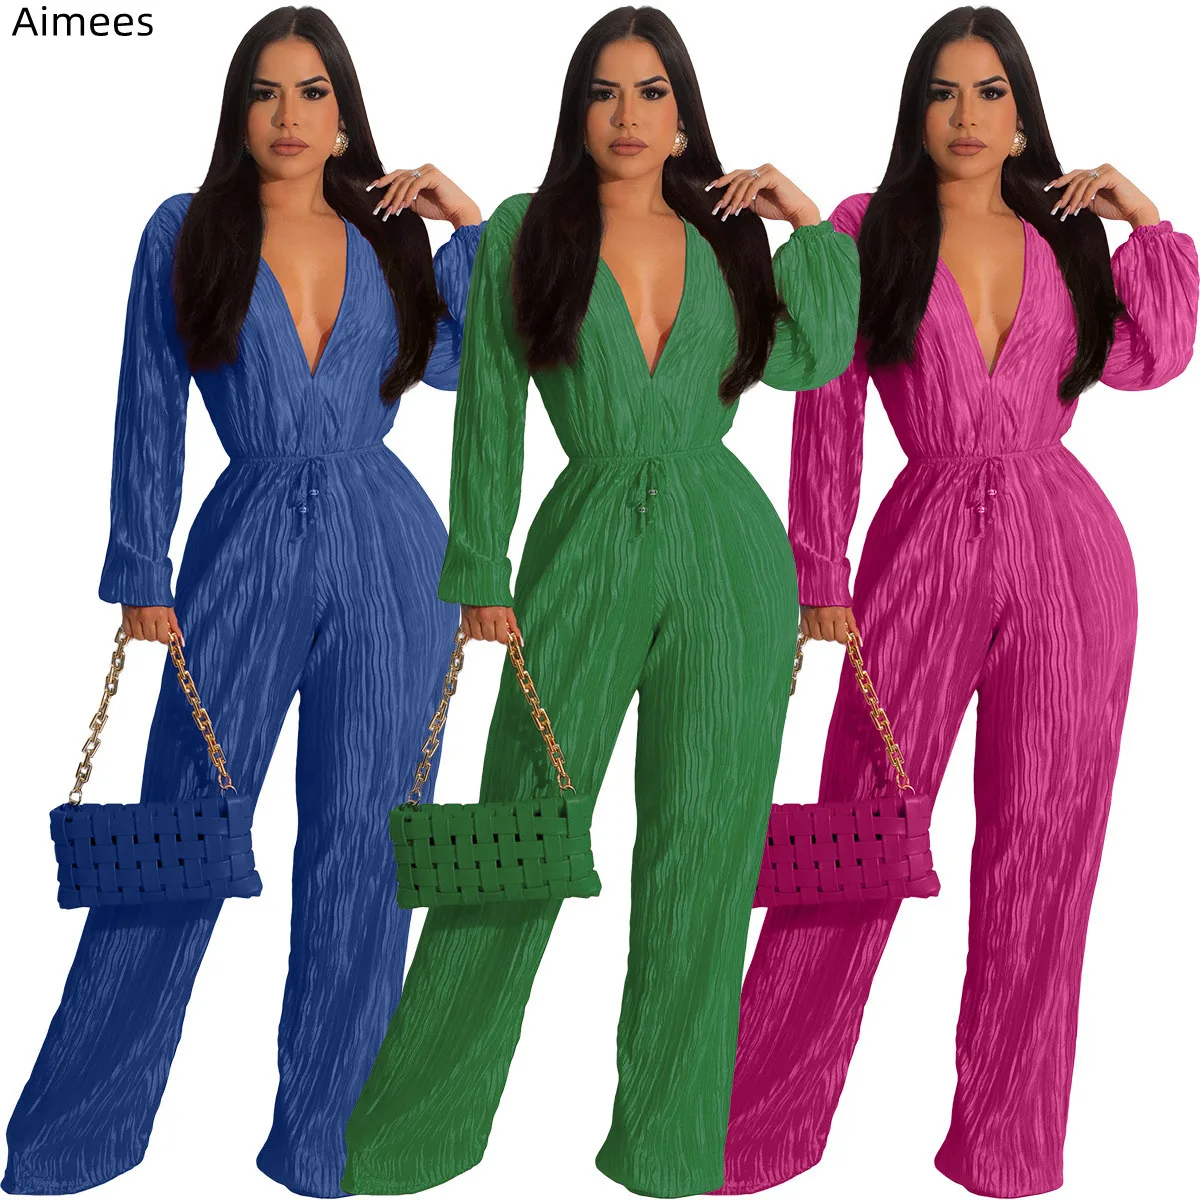 

2023 Charming Pleats Deep V Neck Women Jumpsuit Long Sleeves Sash High Waist Wide Leg Pants Parry Overalls Sexy Rompers